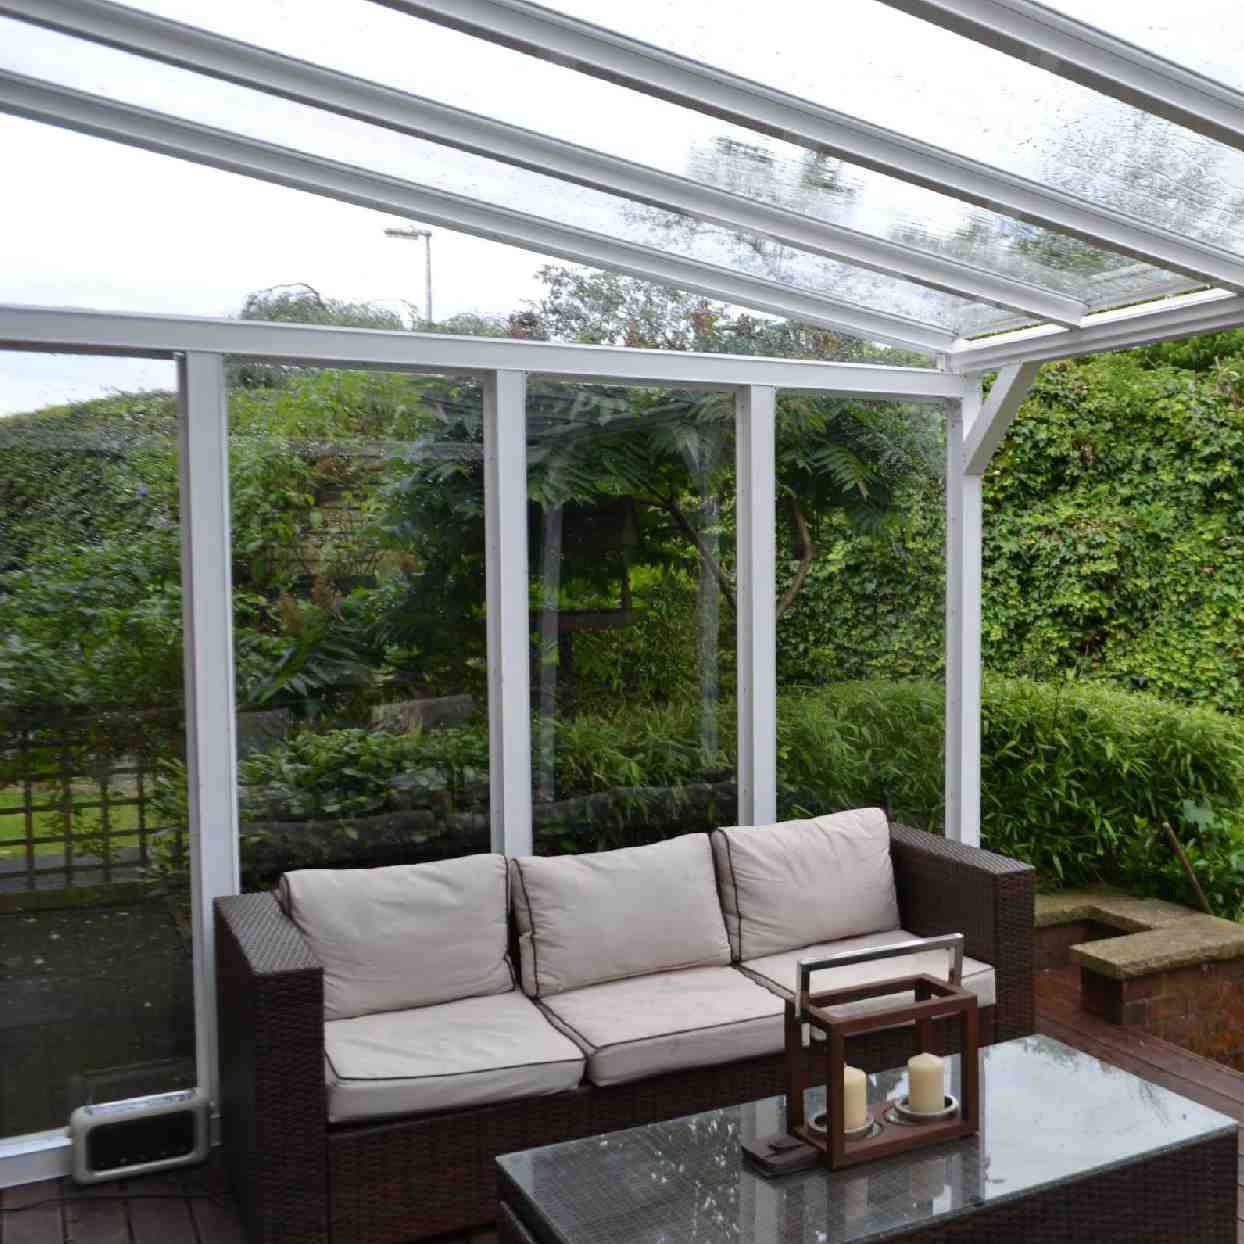 Buy Omega Verandah White with 16mm Polycarbonate Glazing - 6.0m (W) x 4.0m (P), (3) Supporting Posts online today